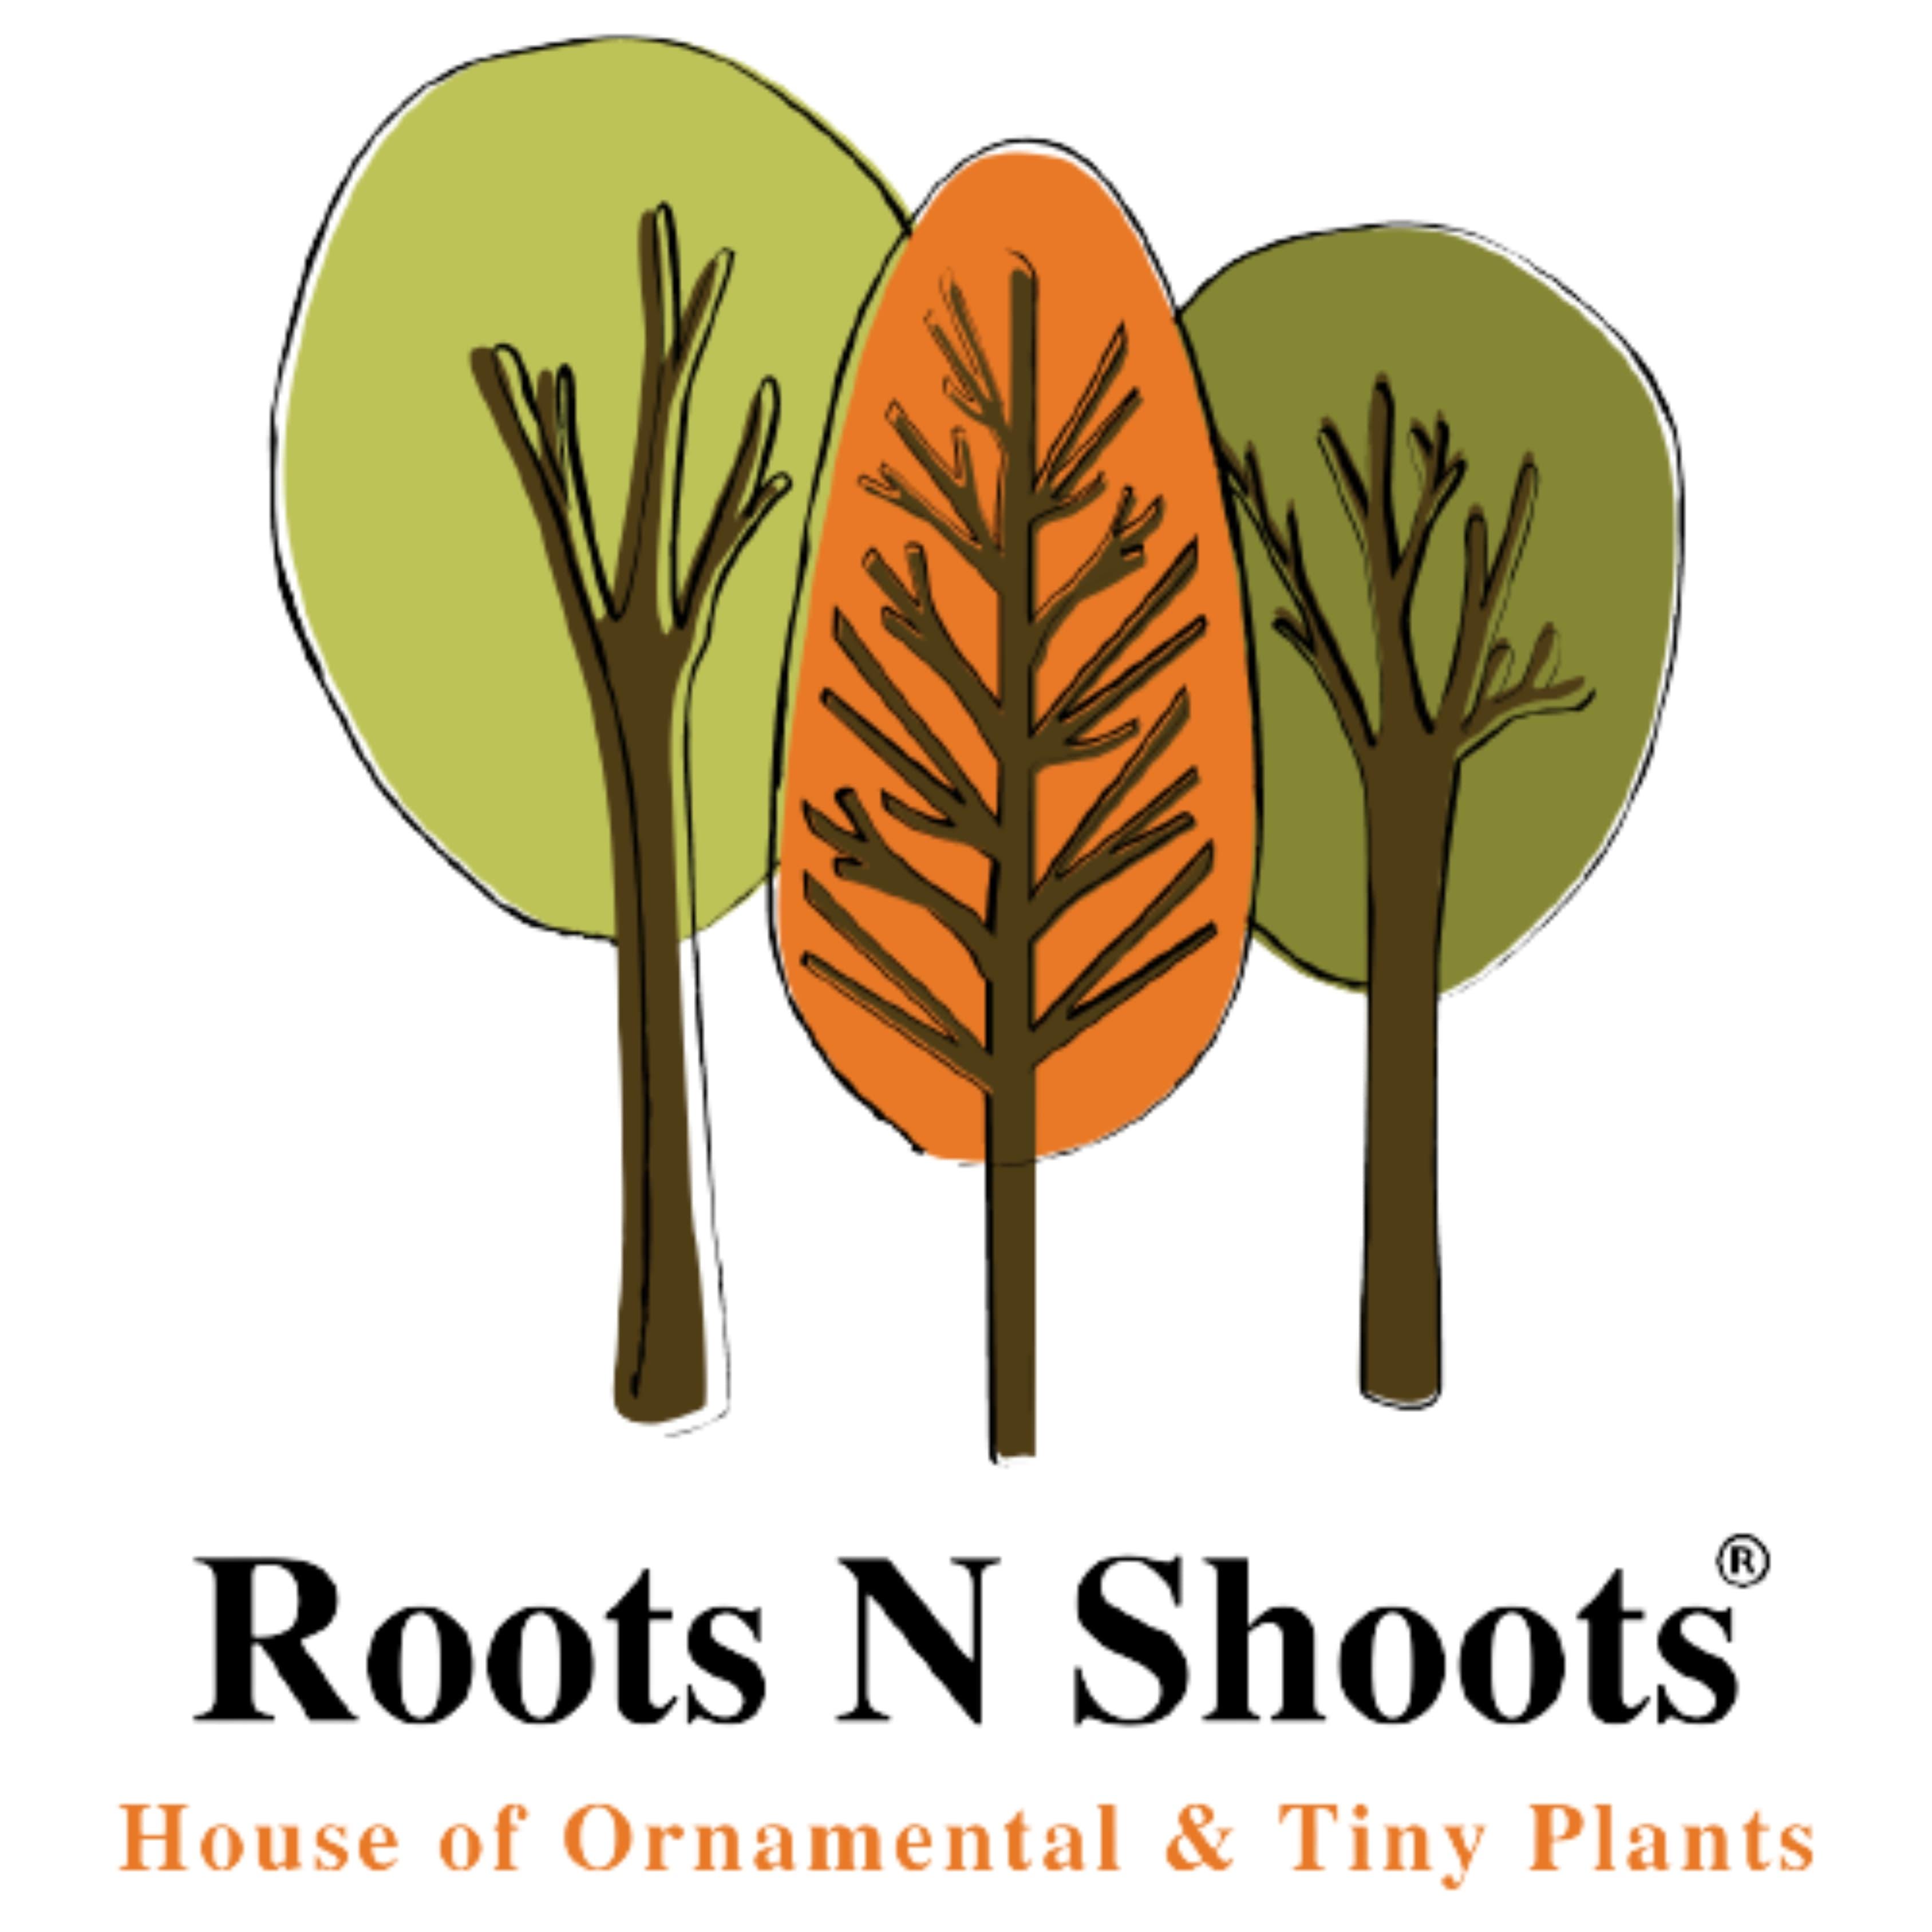 Roots N Shoots